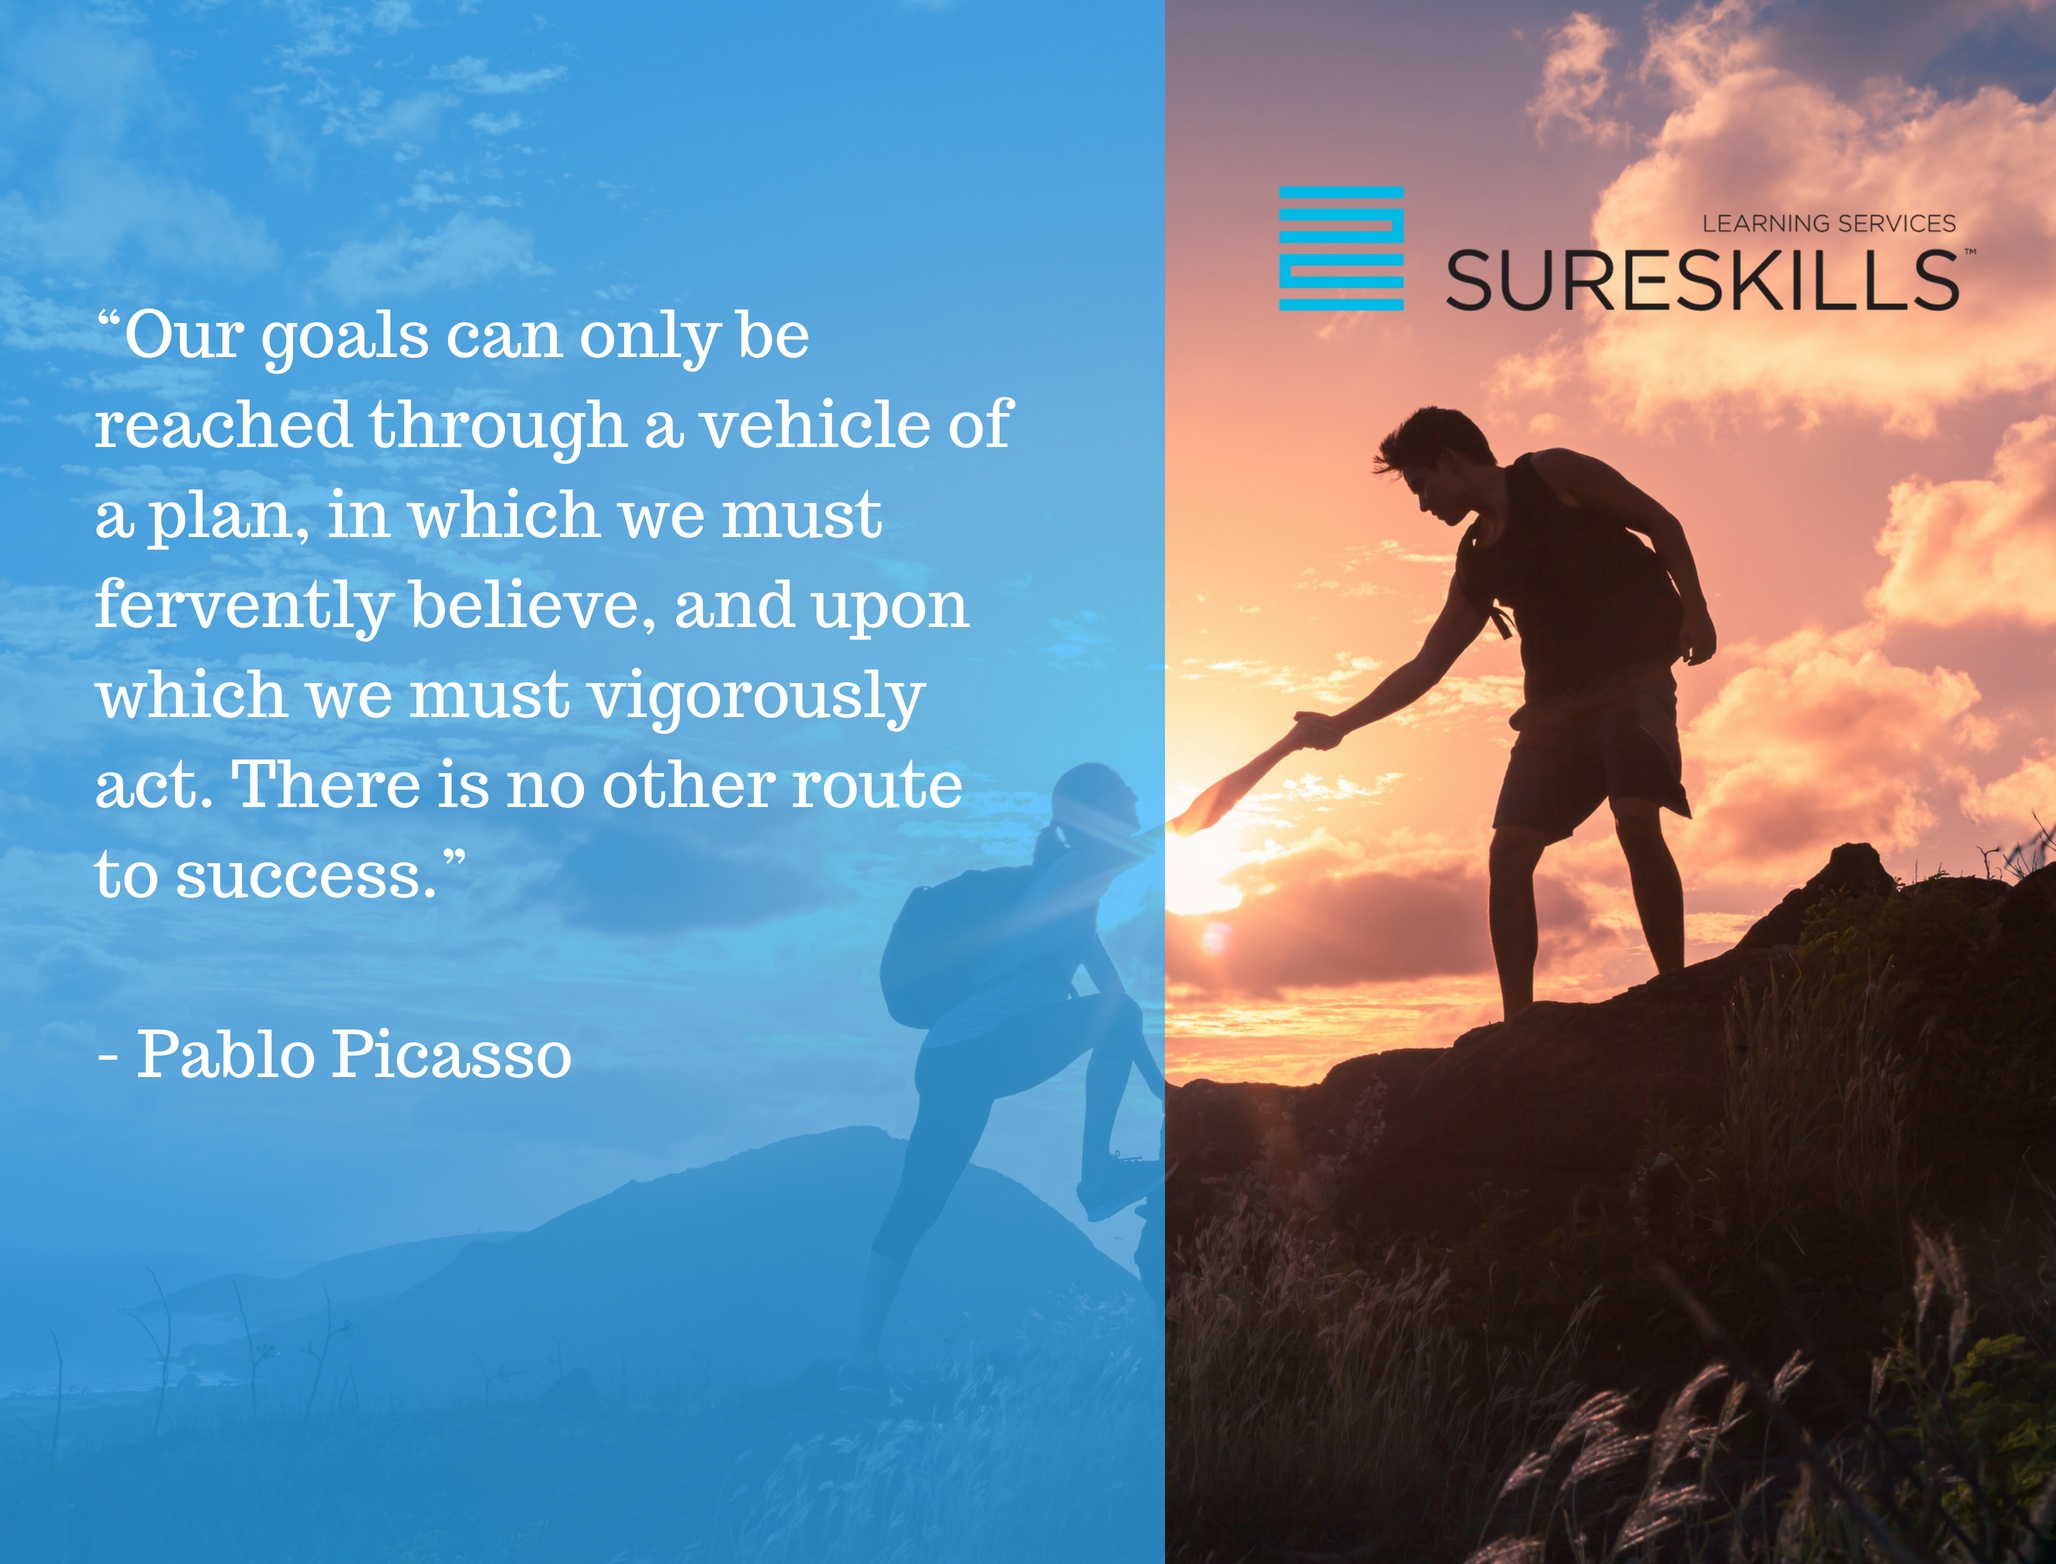 “Our goals can only be reached through a vehicle of a plan, in which we must fervently believe, and upon which we must vigorously act. There is no other route to success.”